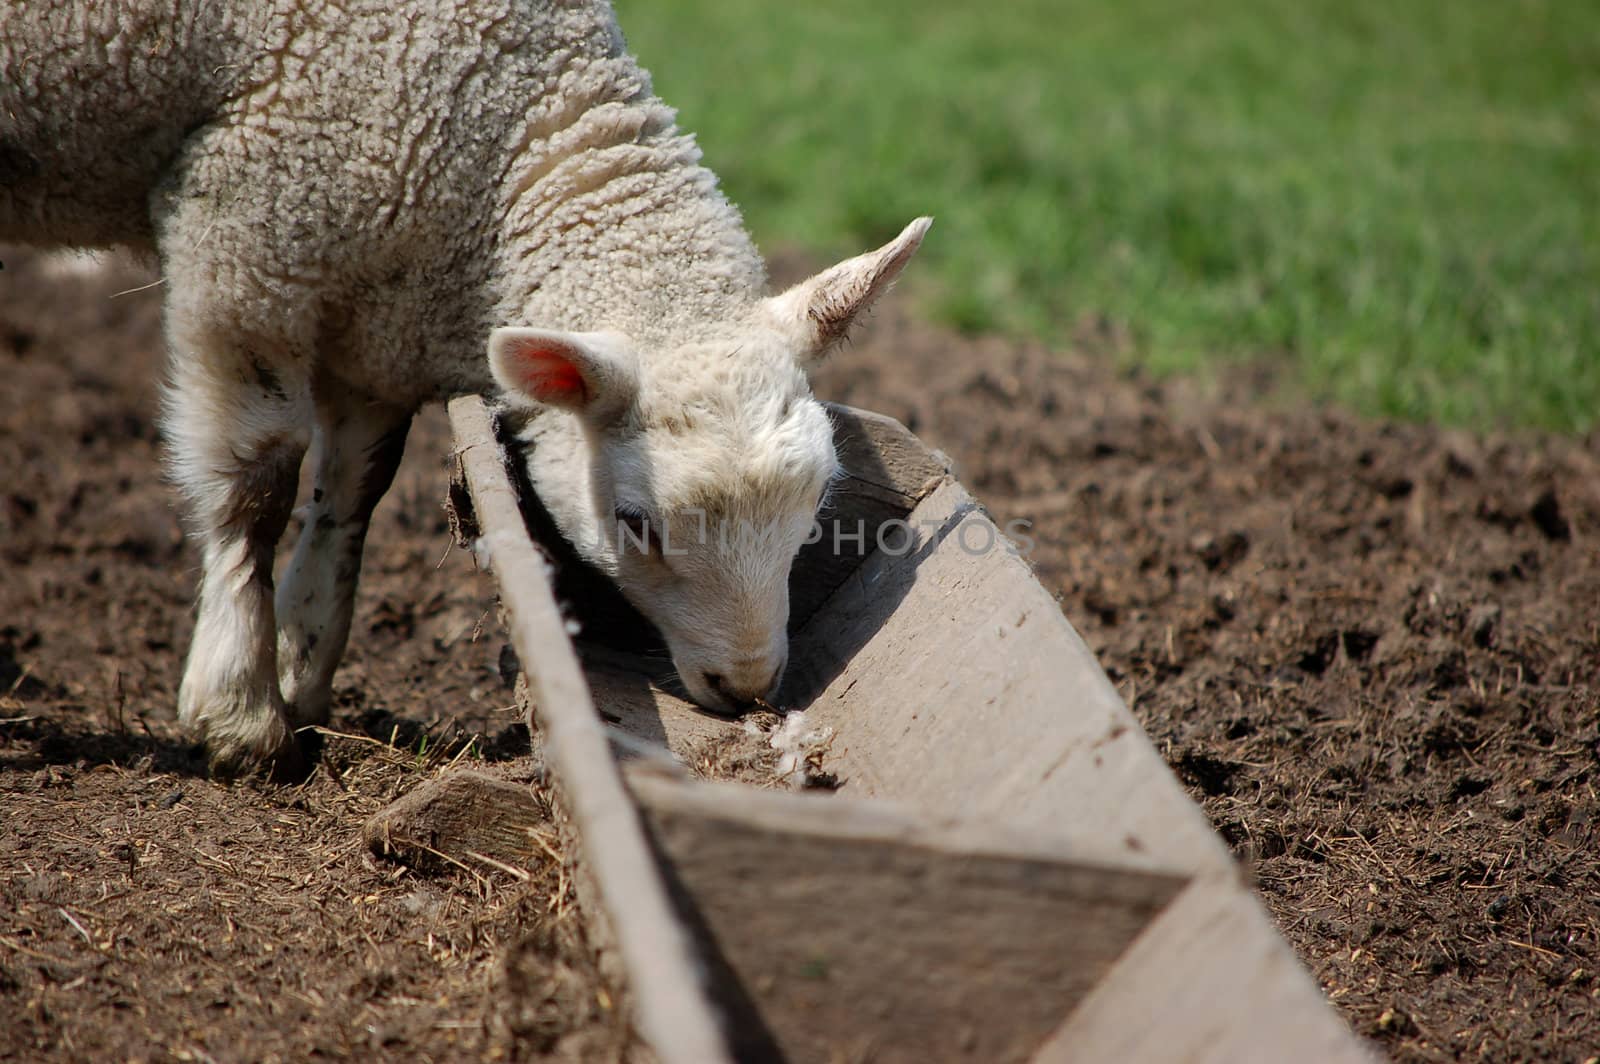 Cute lamb eating from trough by sarahdoow